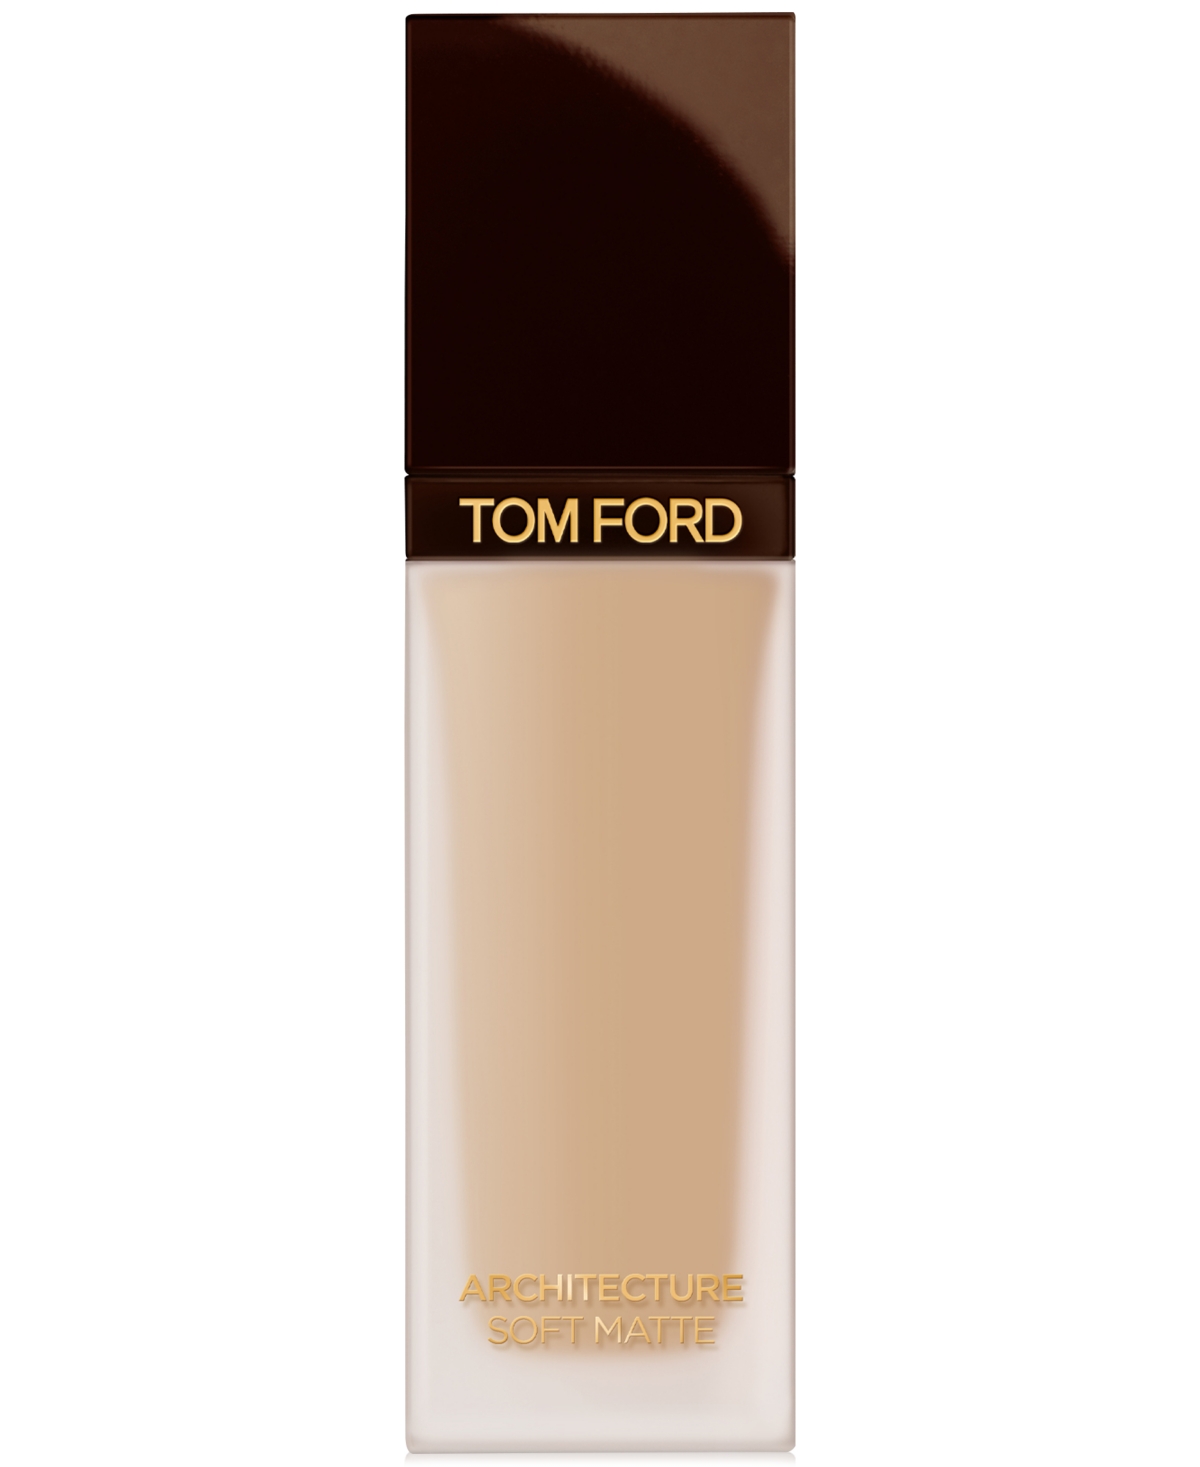 Tom Ford Architecture Soft Matte Blurring Foundation In . Fawn - Light Medium